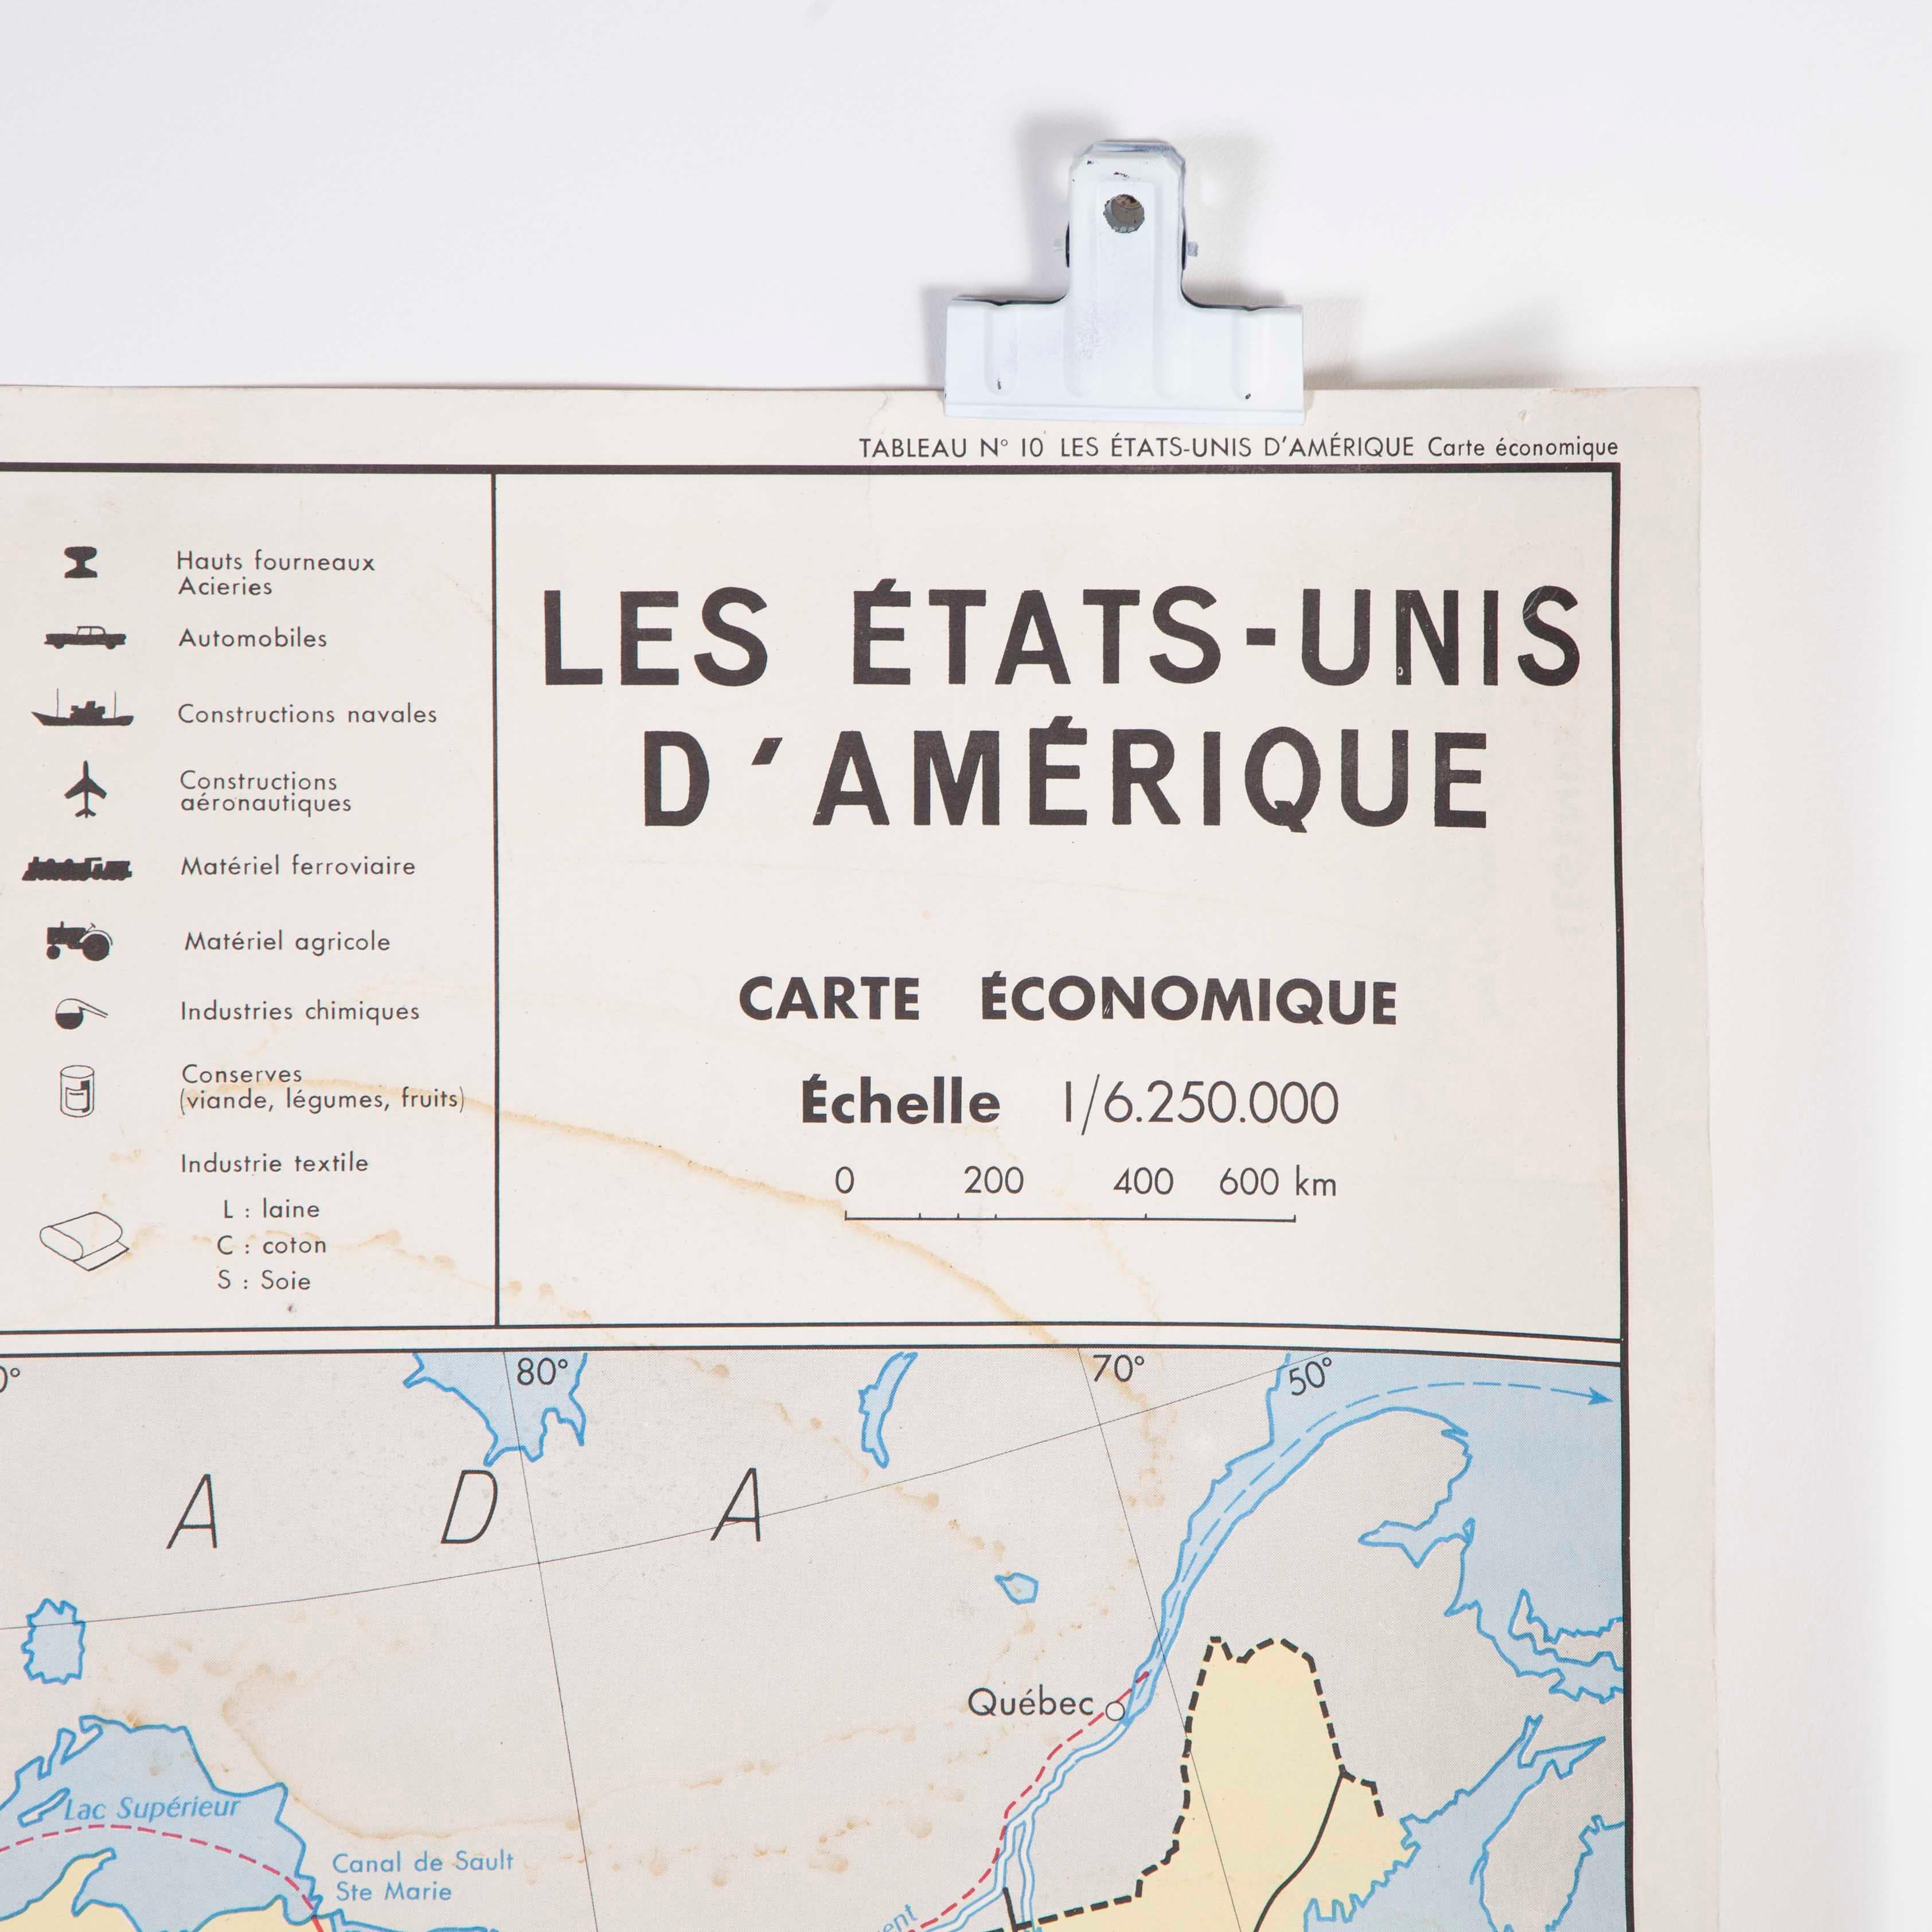 Paper French Double Sided Educational School Poster of the Economies